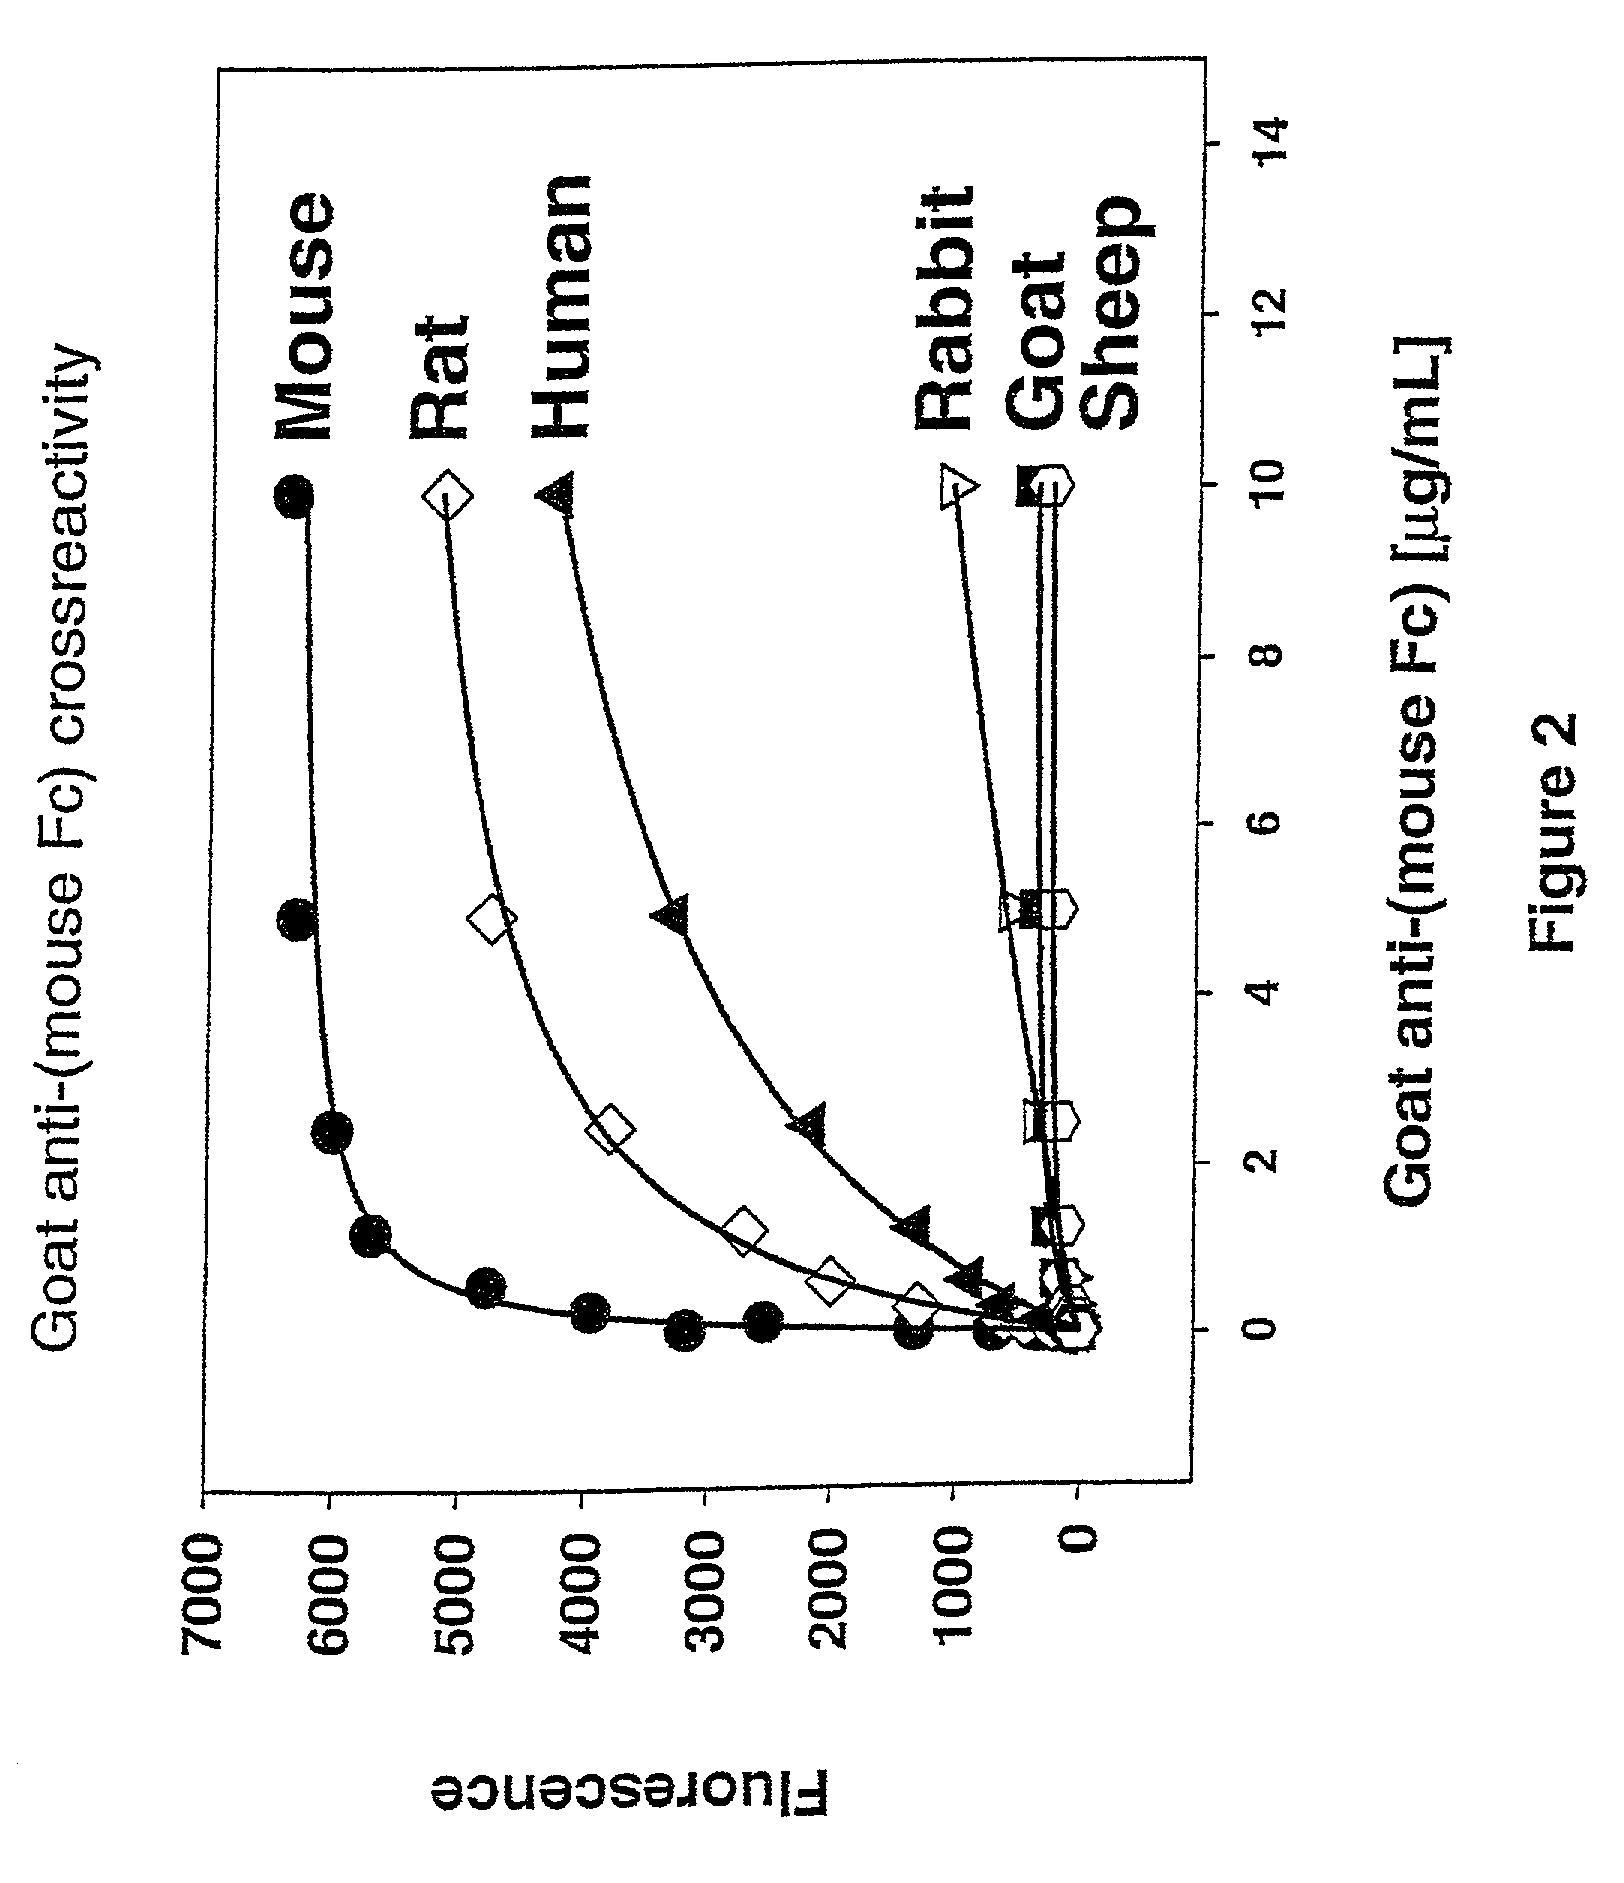 Antibody complexes and methods for immunolabeling